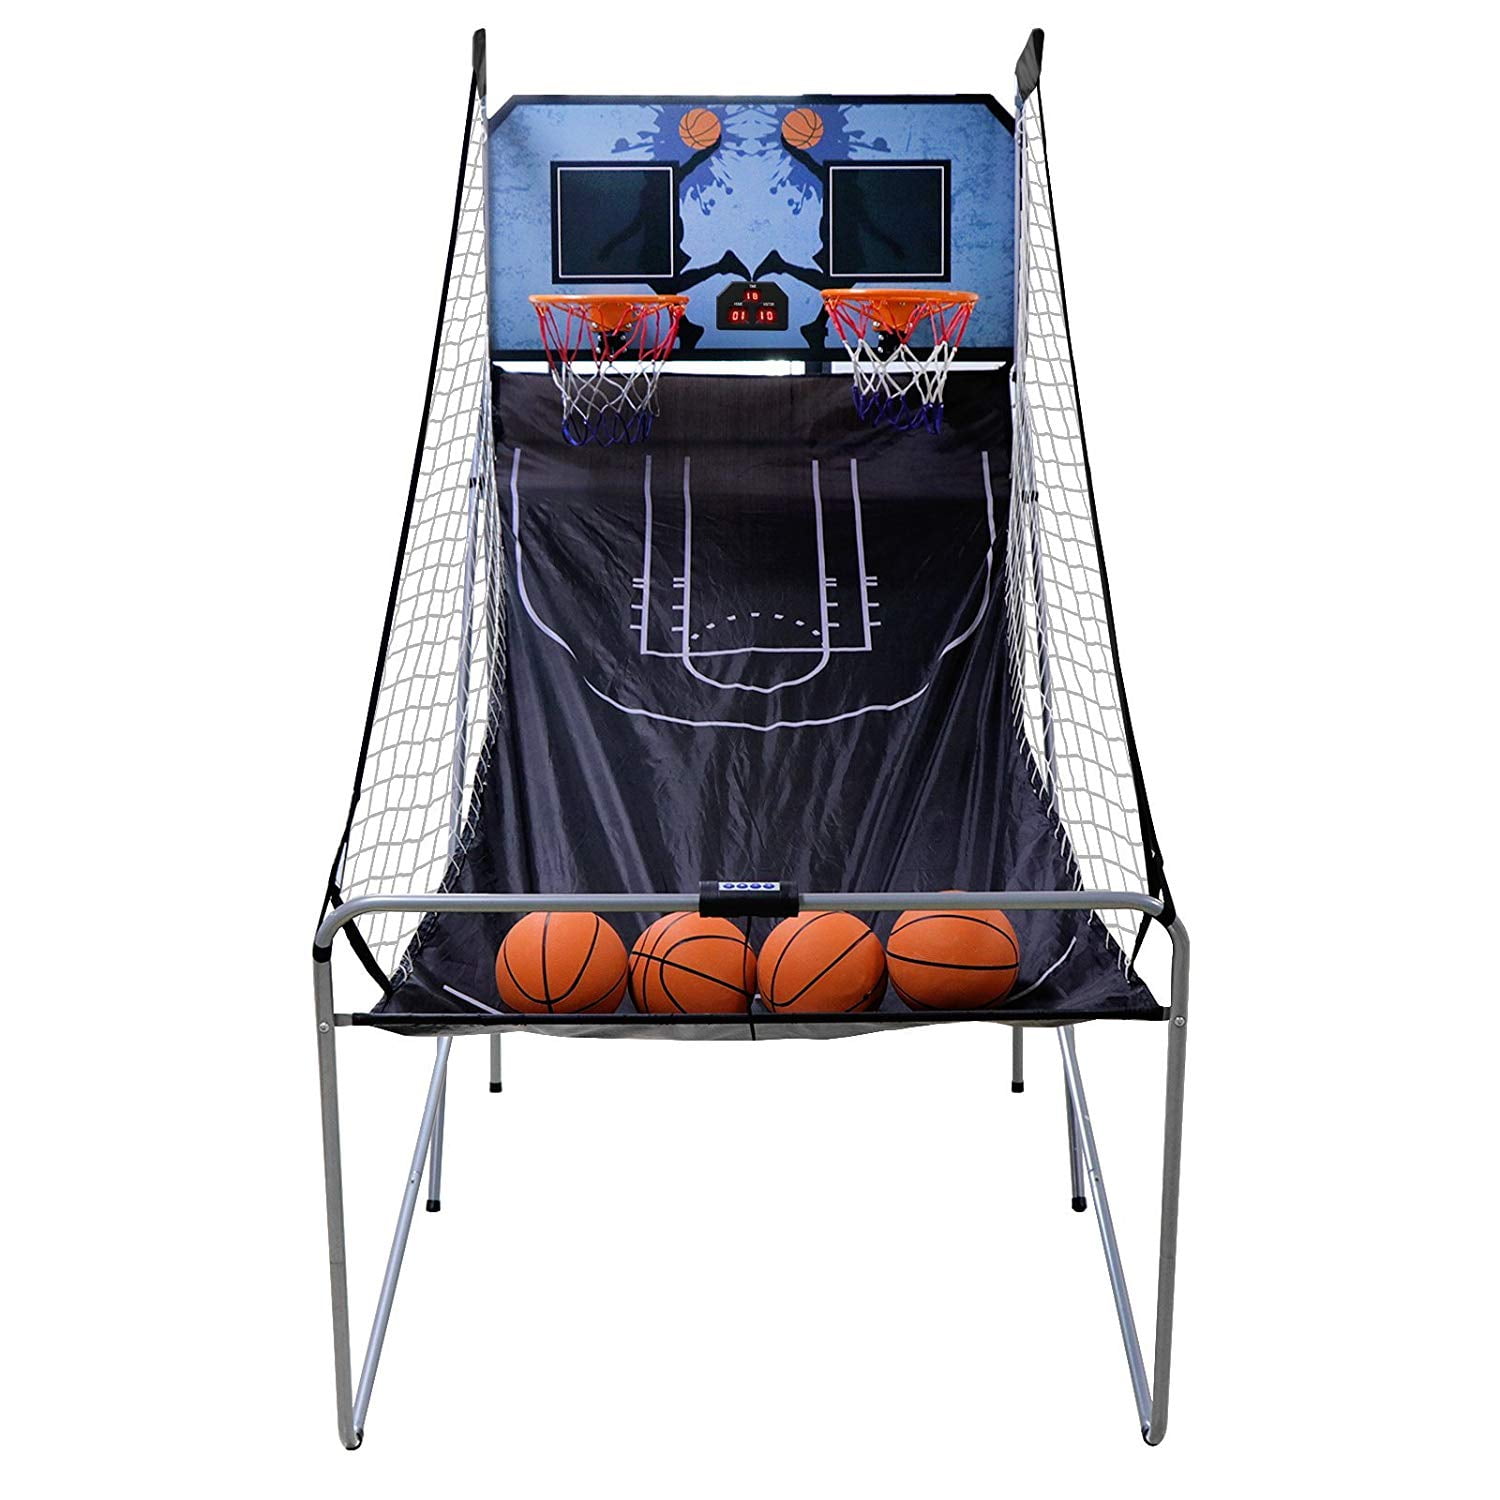 2 Player Arcade Basketball Game 4 Balls Sports Indoor Electronic Shot Hoops LED 